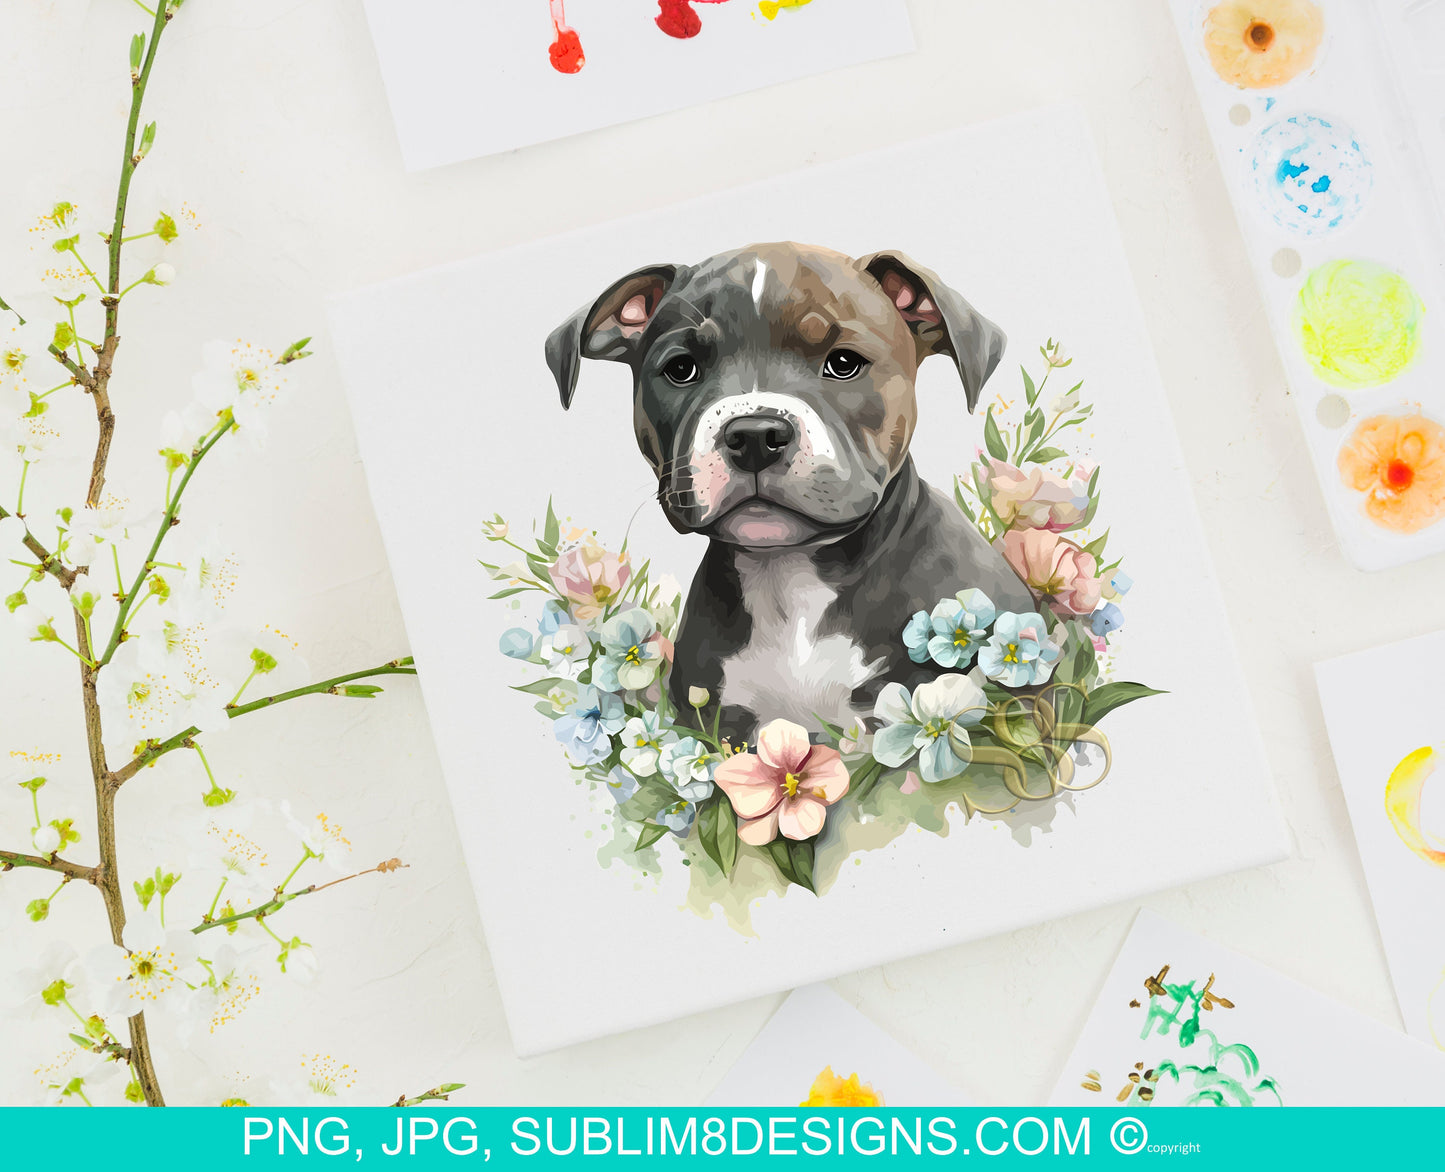 Pastel Watercolor Staffy Puppy Dog with Peach and Blue Flowers